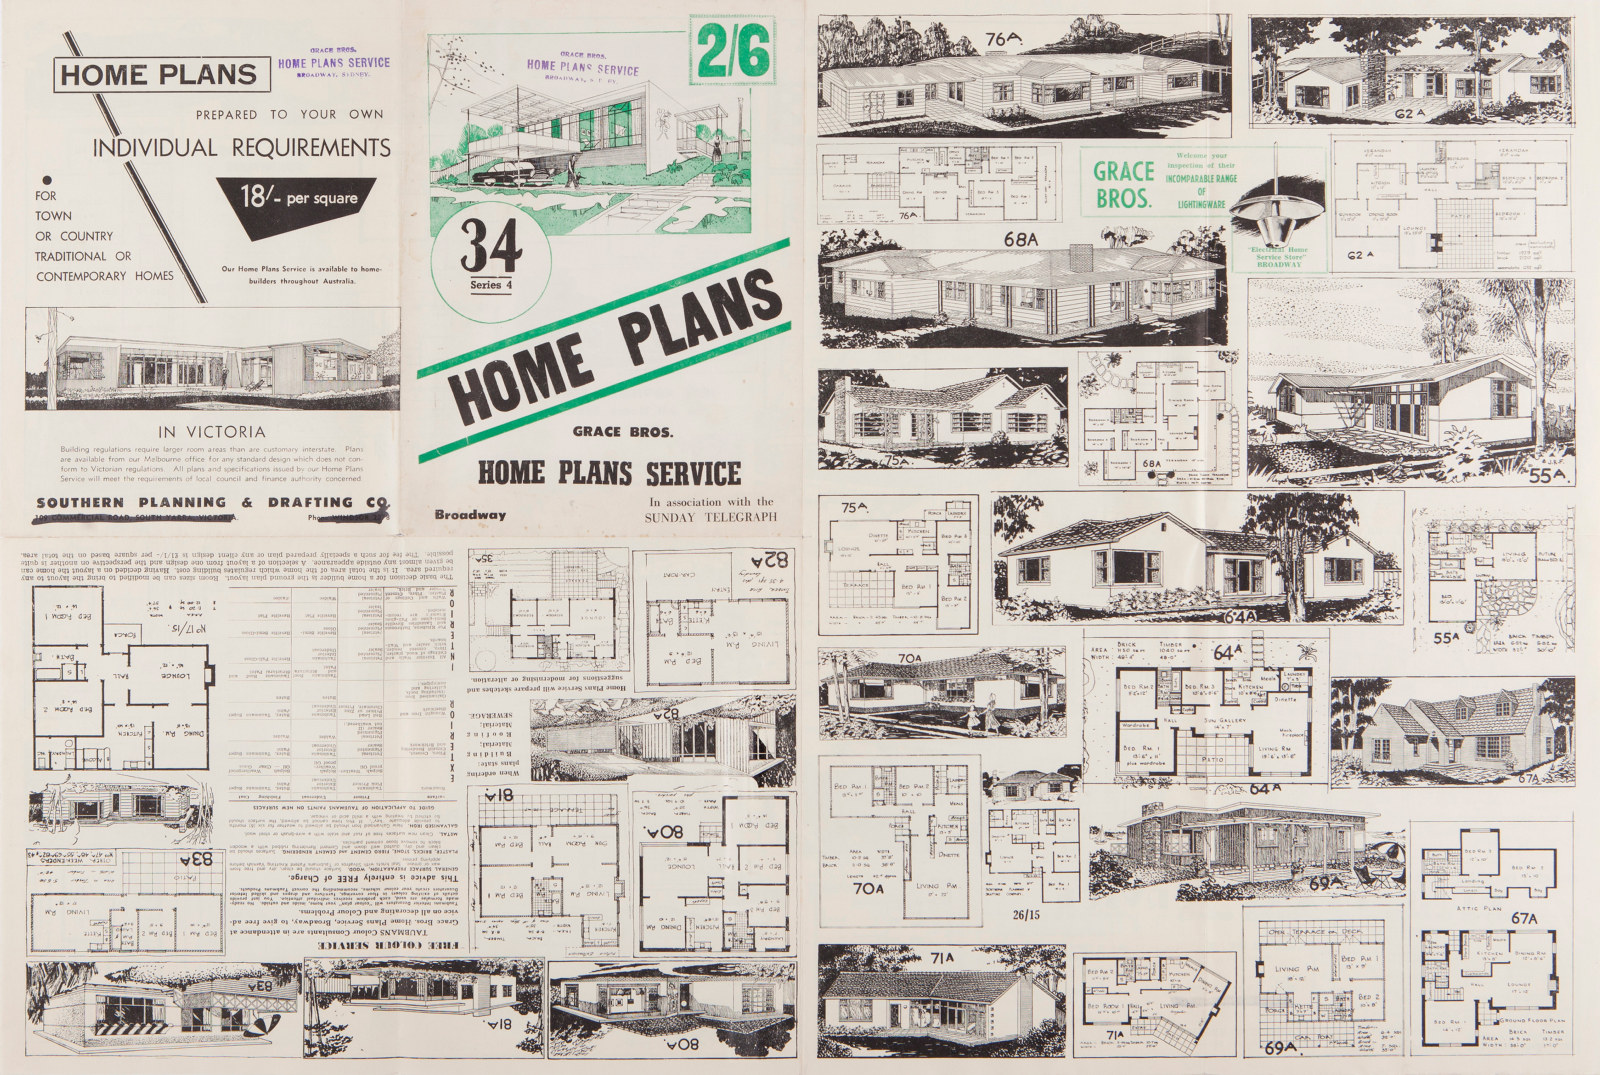 Unfolded catalogue of plans and drawings.